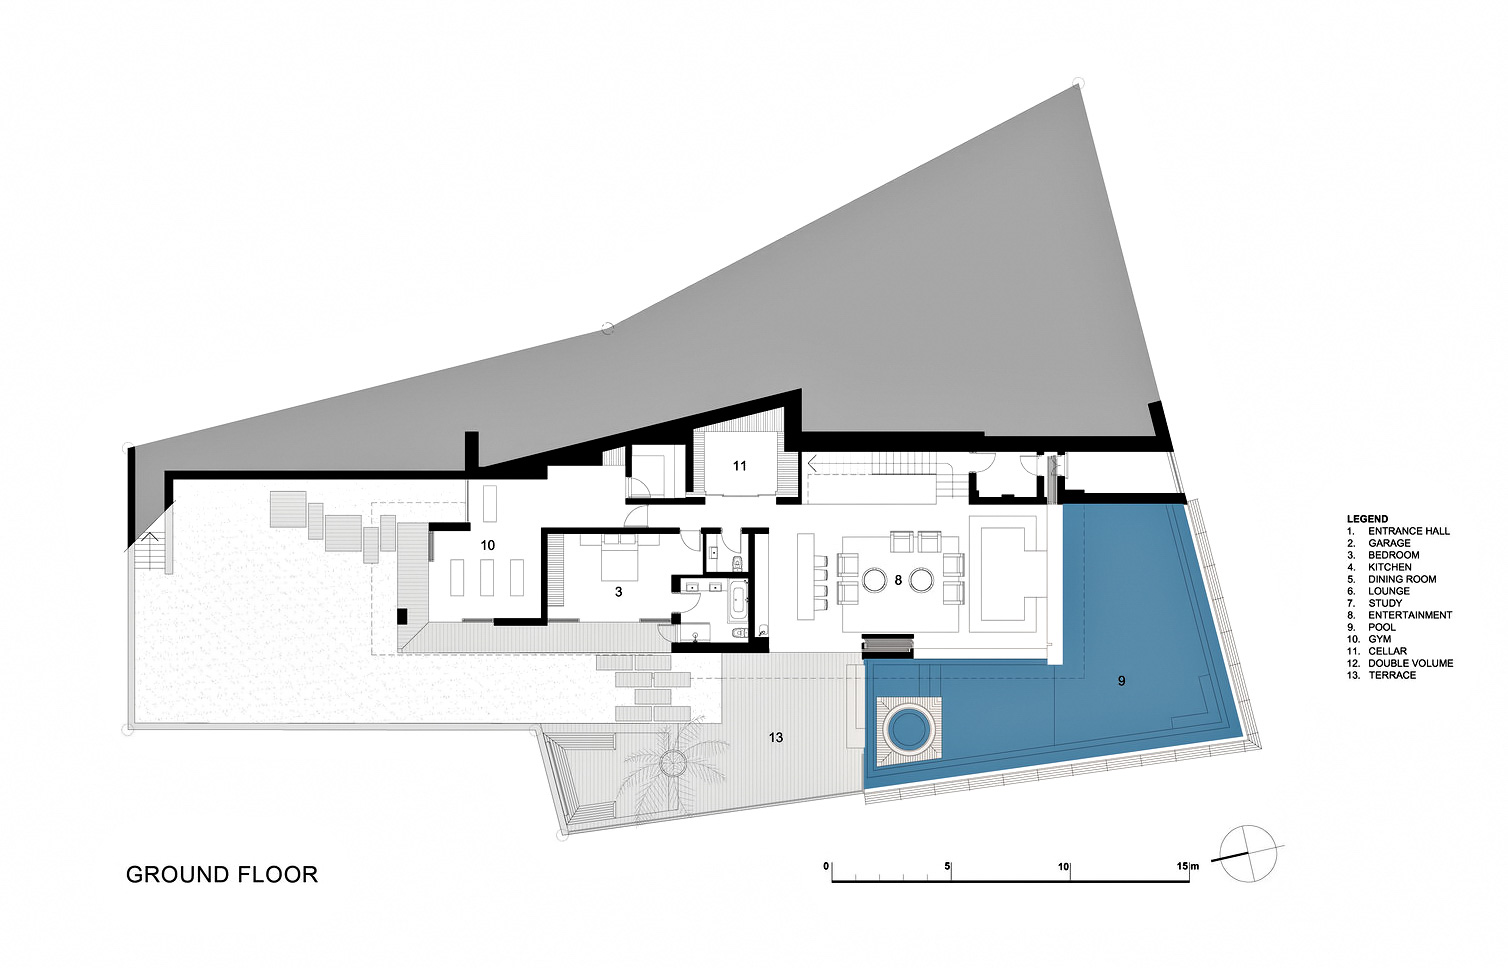 Ground Floor Plan - St. Leon 10 Residence - Bantry Bay, Cape Town, Western Cape, South Africa